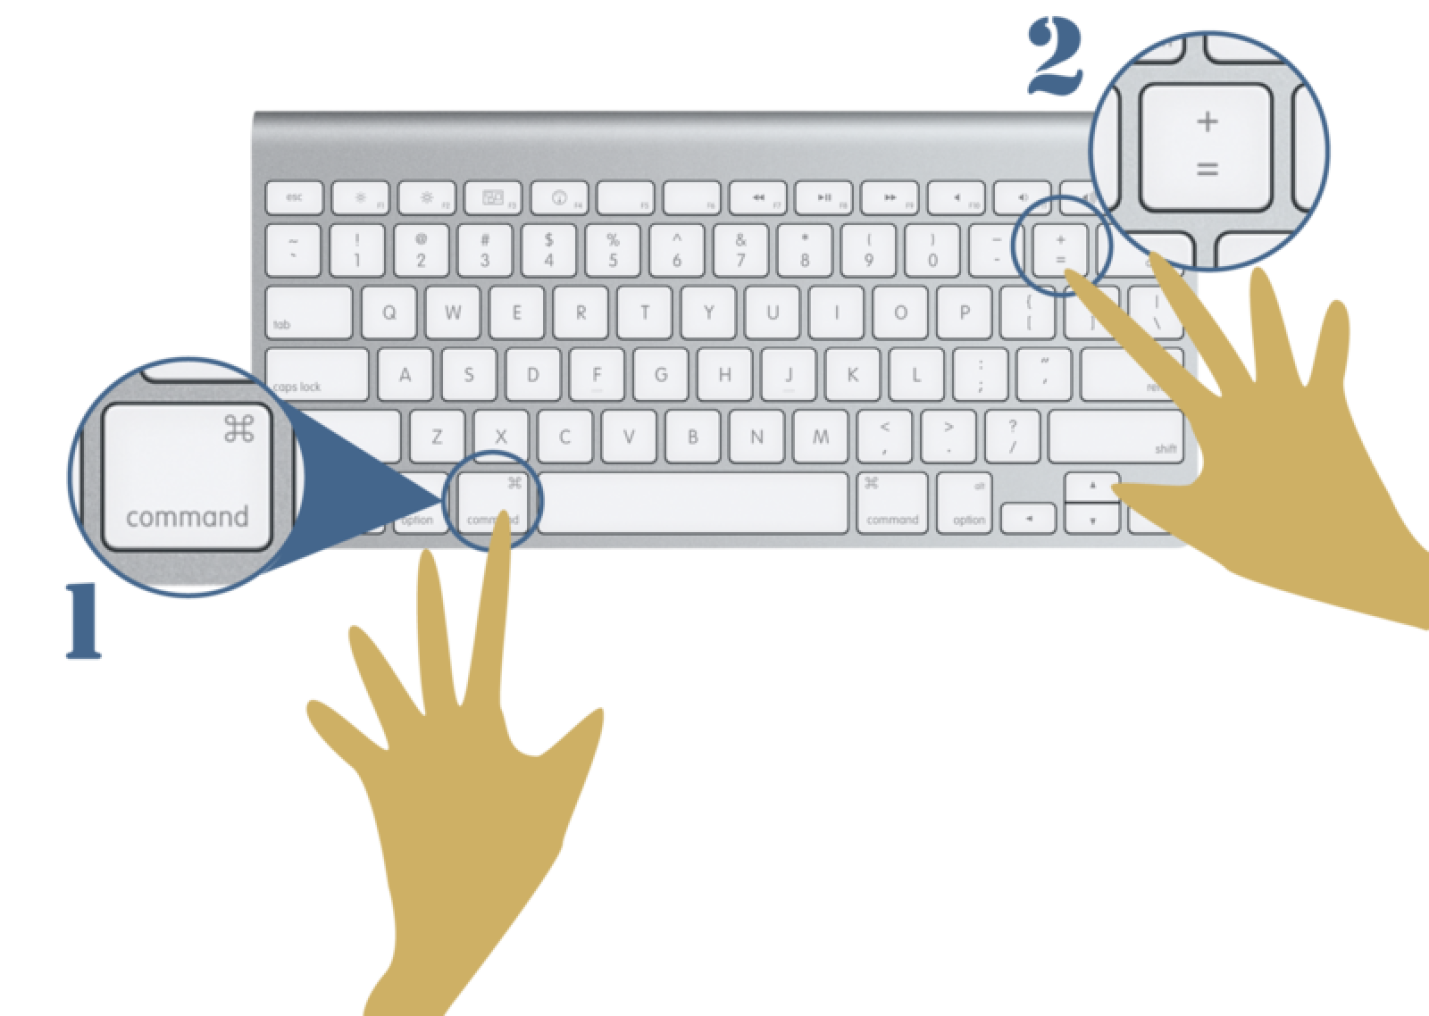 Graphic image showing a computer keyboard with two hands